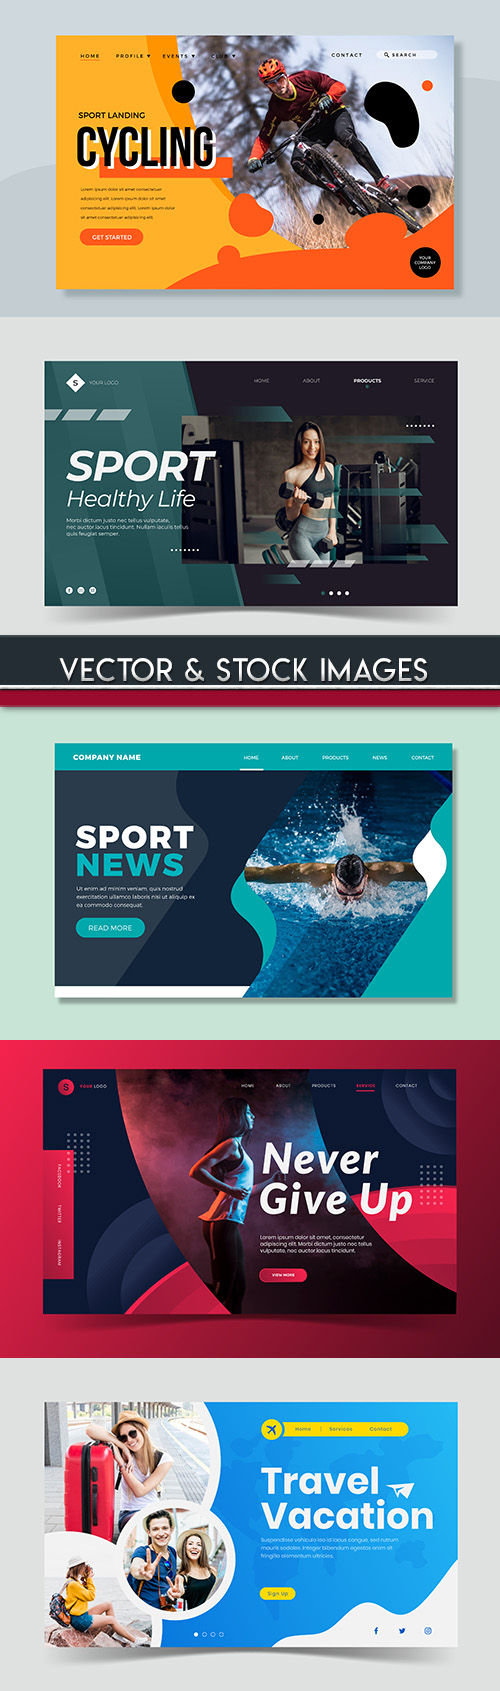 Sports and lifestyle page illustration template